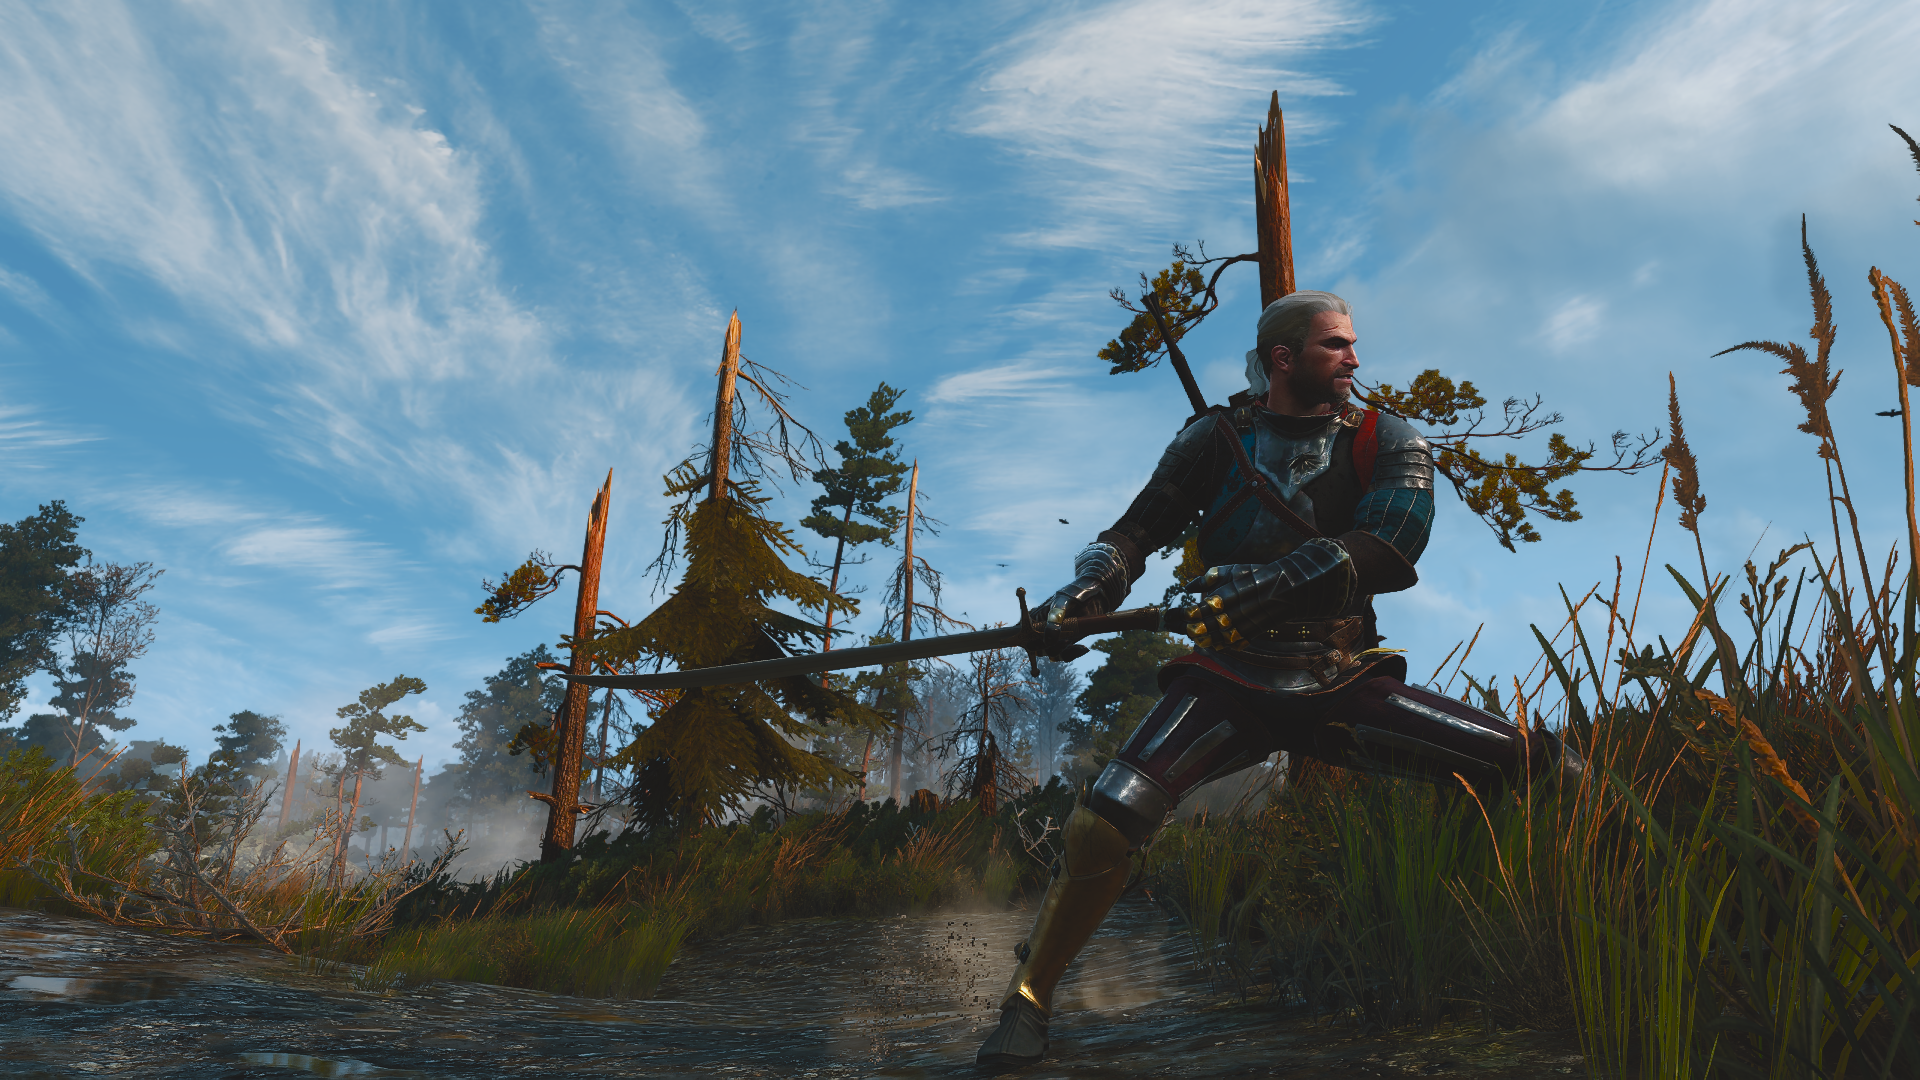 General 1920x1080 The Witcher 3: Wild Hunt The Witcher video game landscape medieval video games Geralt of Rivia CD Projekt RED video game characters book characters screen shot